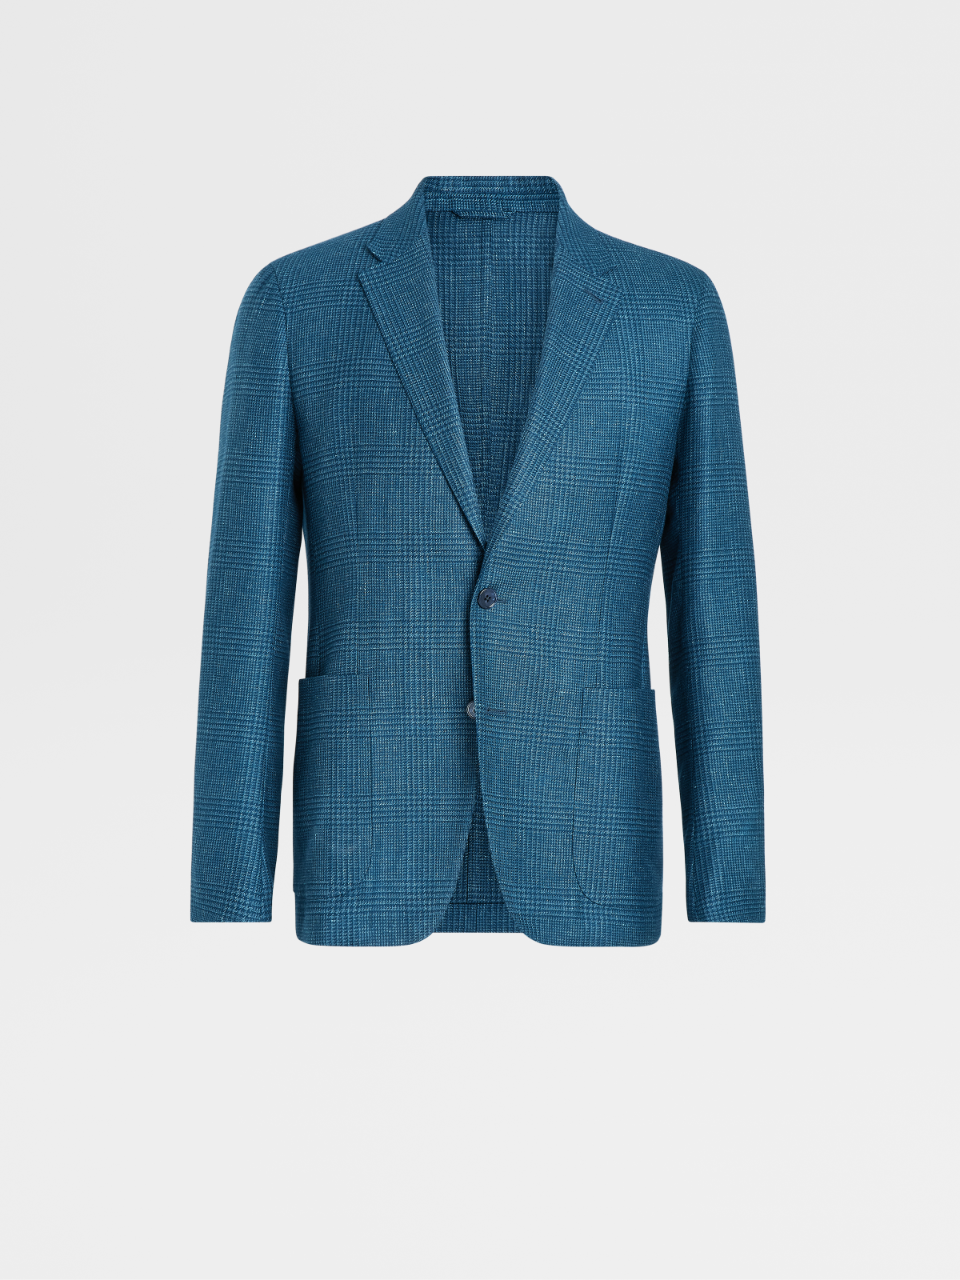 Teal Blue Prince of Wales Cashmere Silk and Linen Fairway Jacket, Drop 7